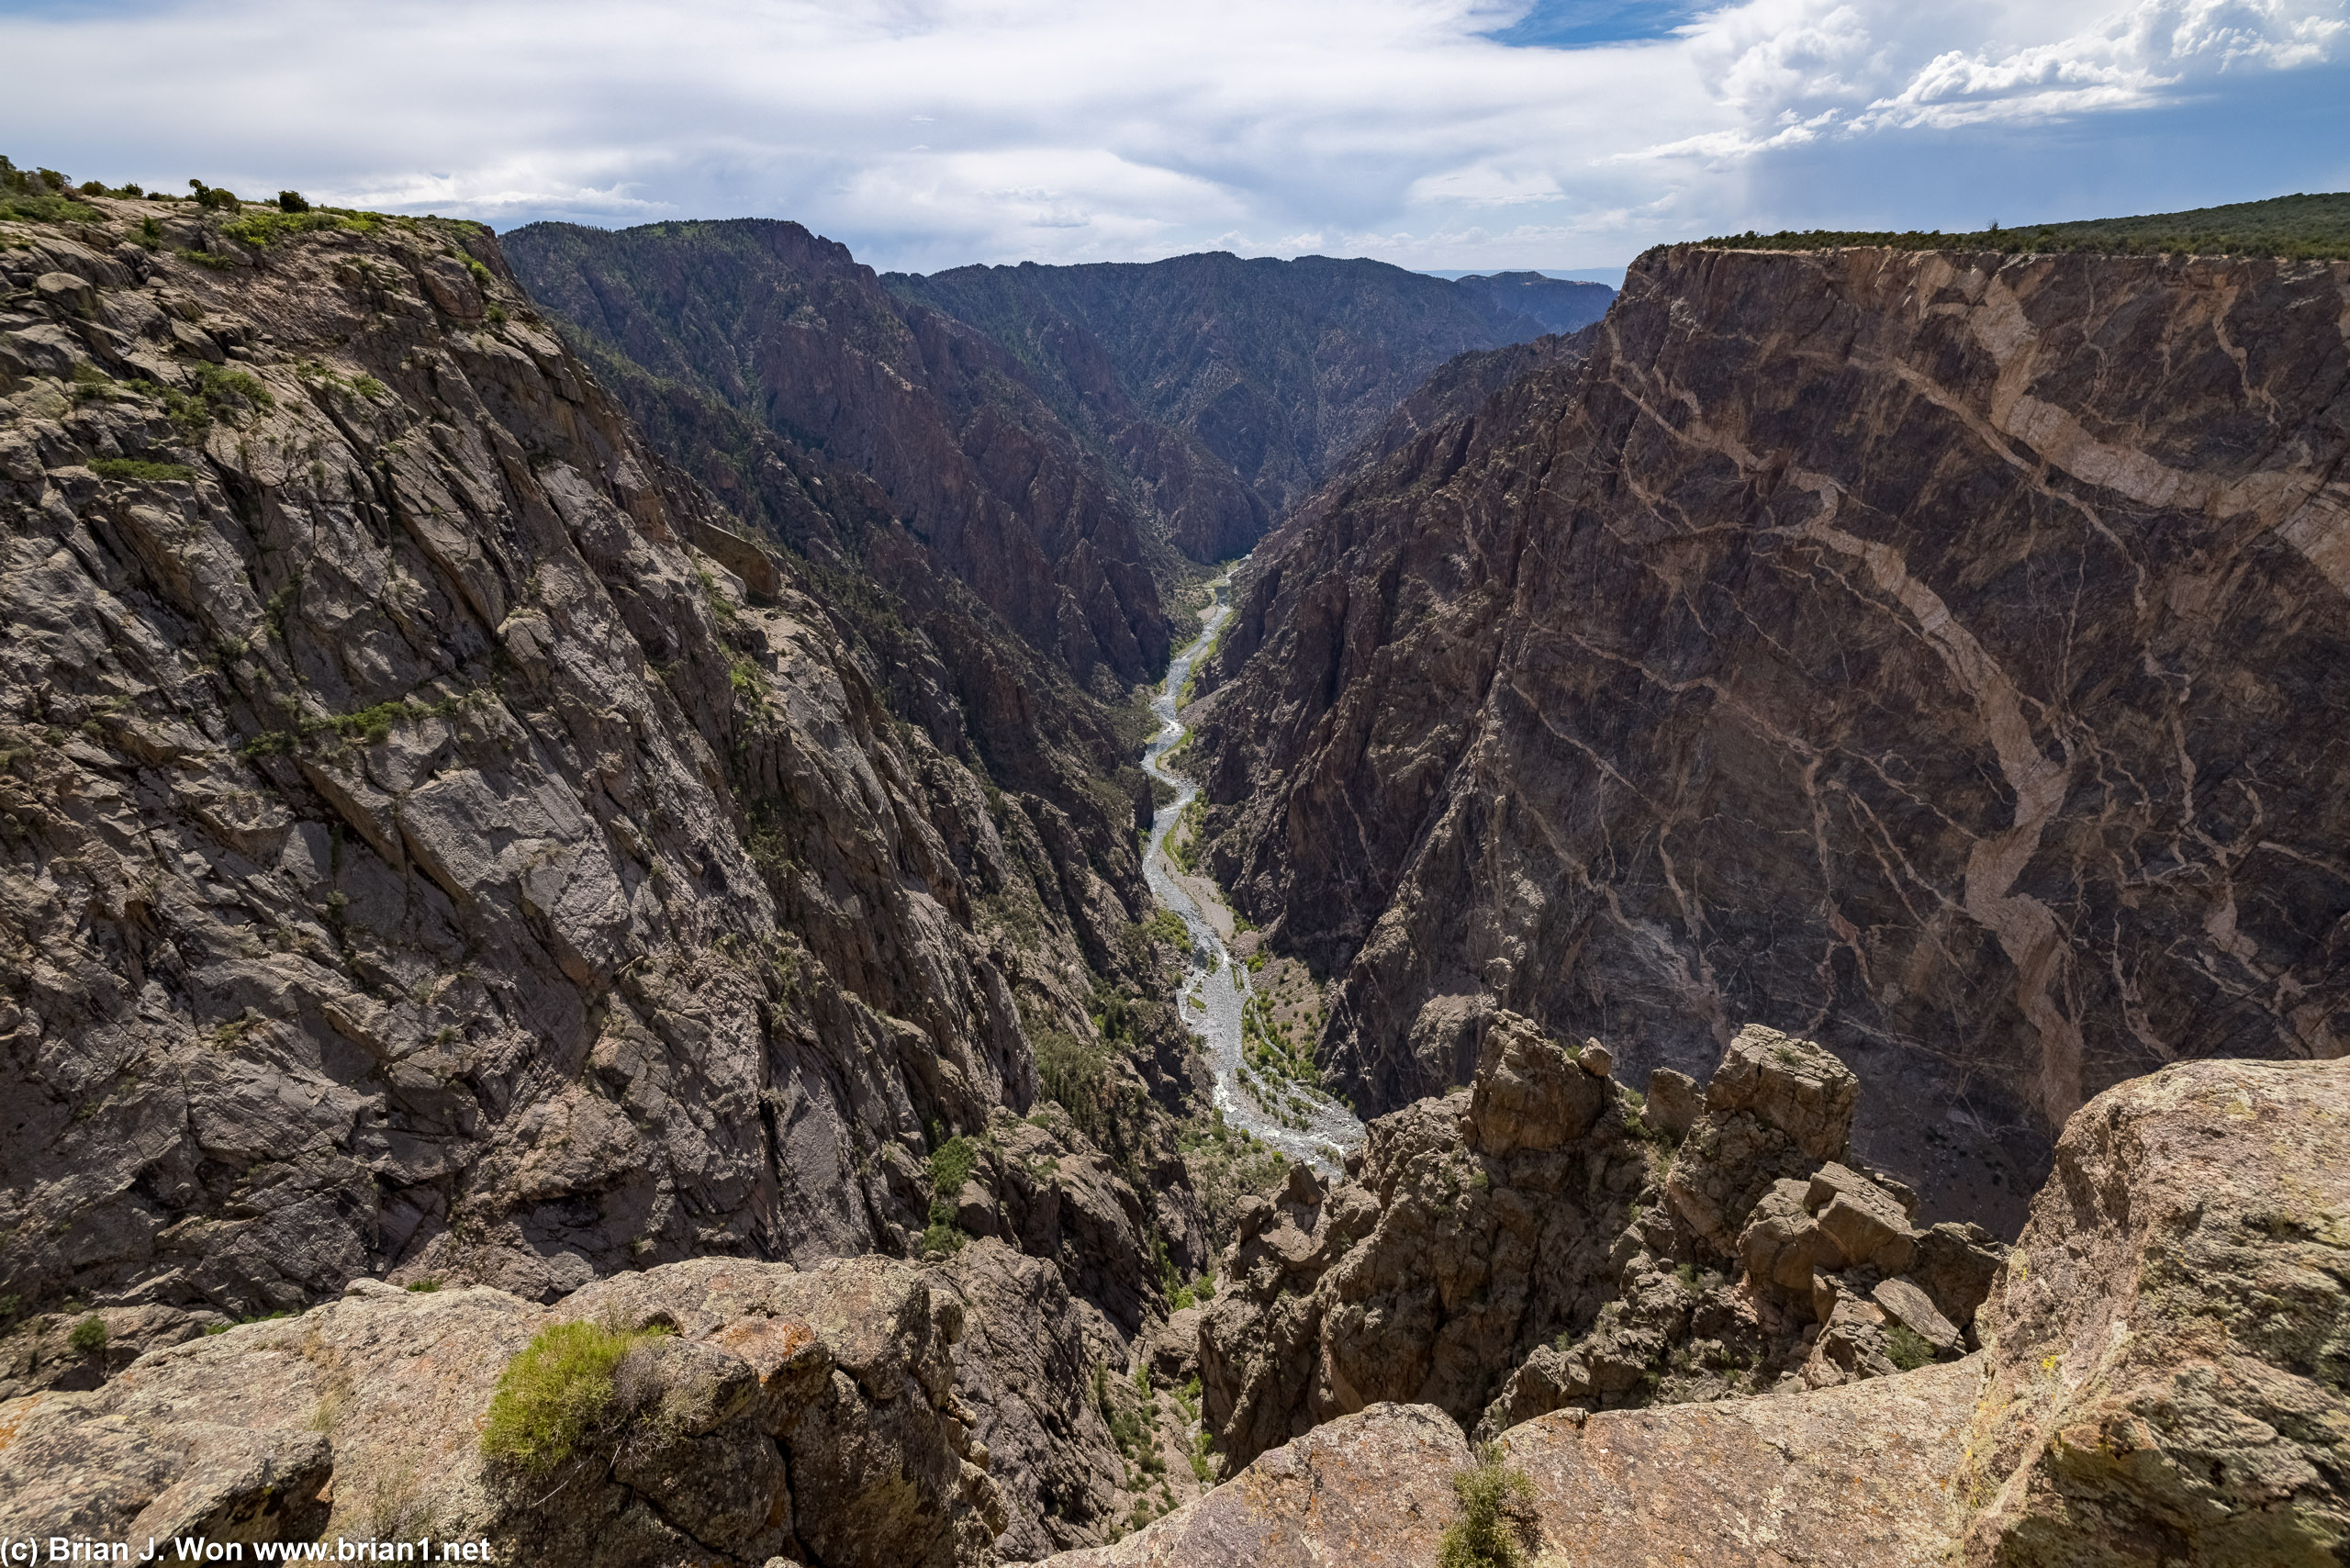 Looking down at the Gunnison River.